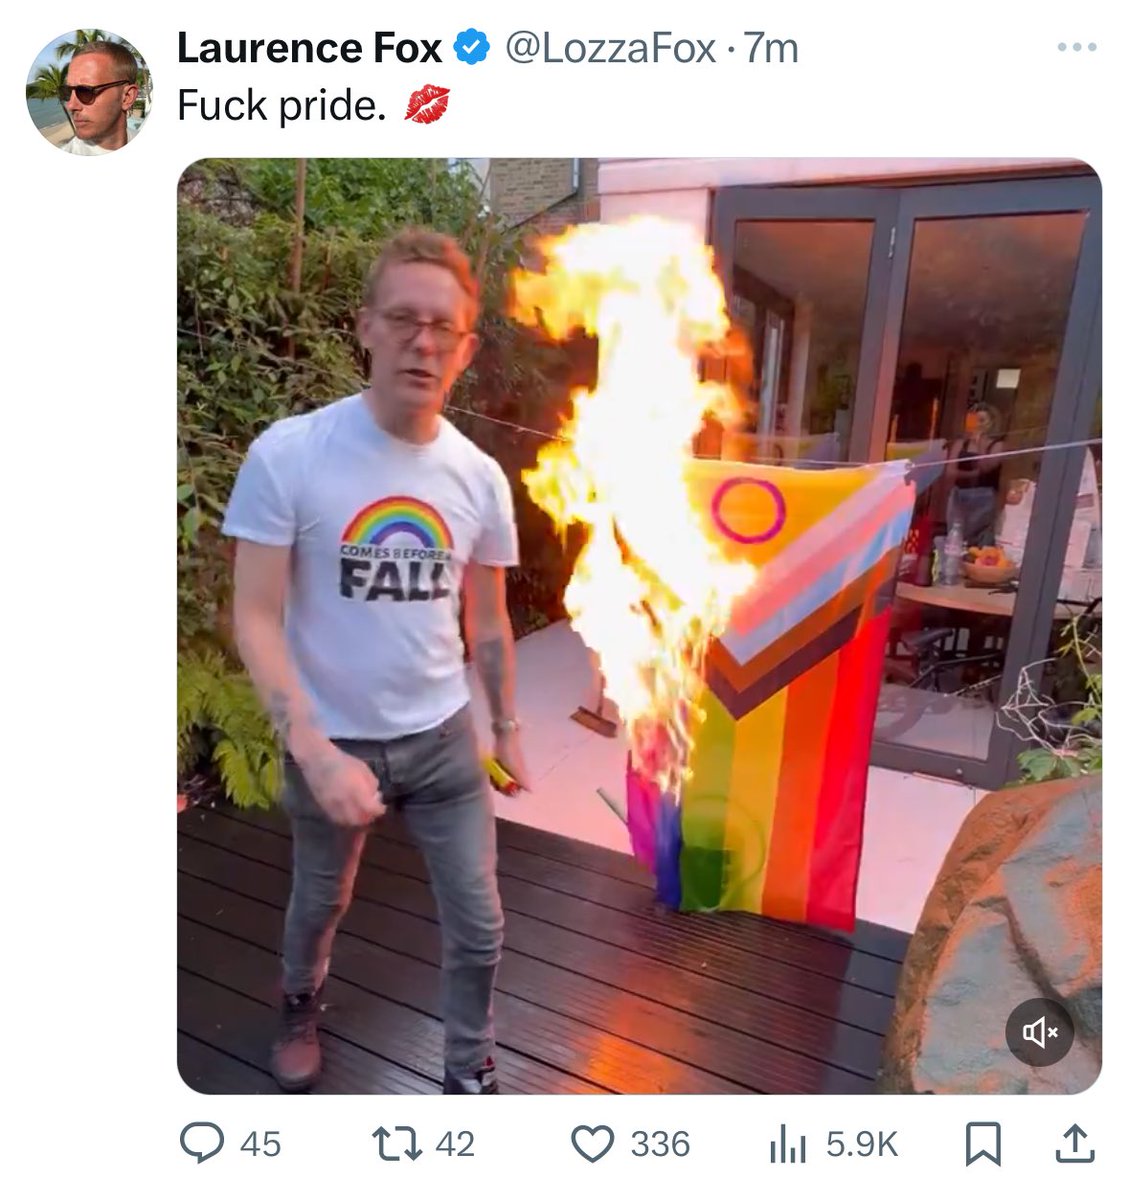 this man is spending his birthday - which happens to fall on a bank holiday sunday - at home burning pride flags. pathetic and sad little life.